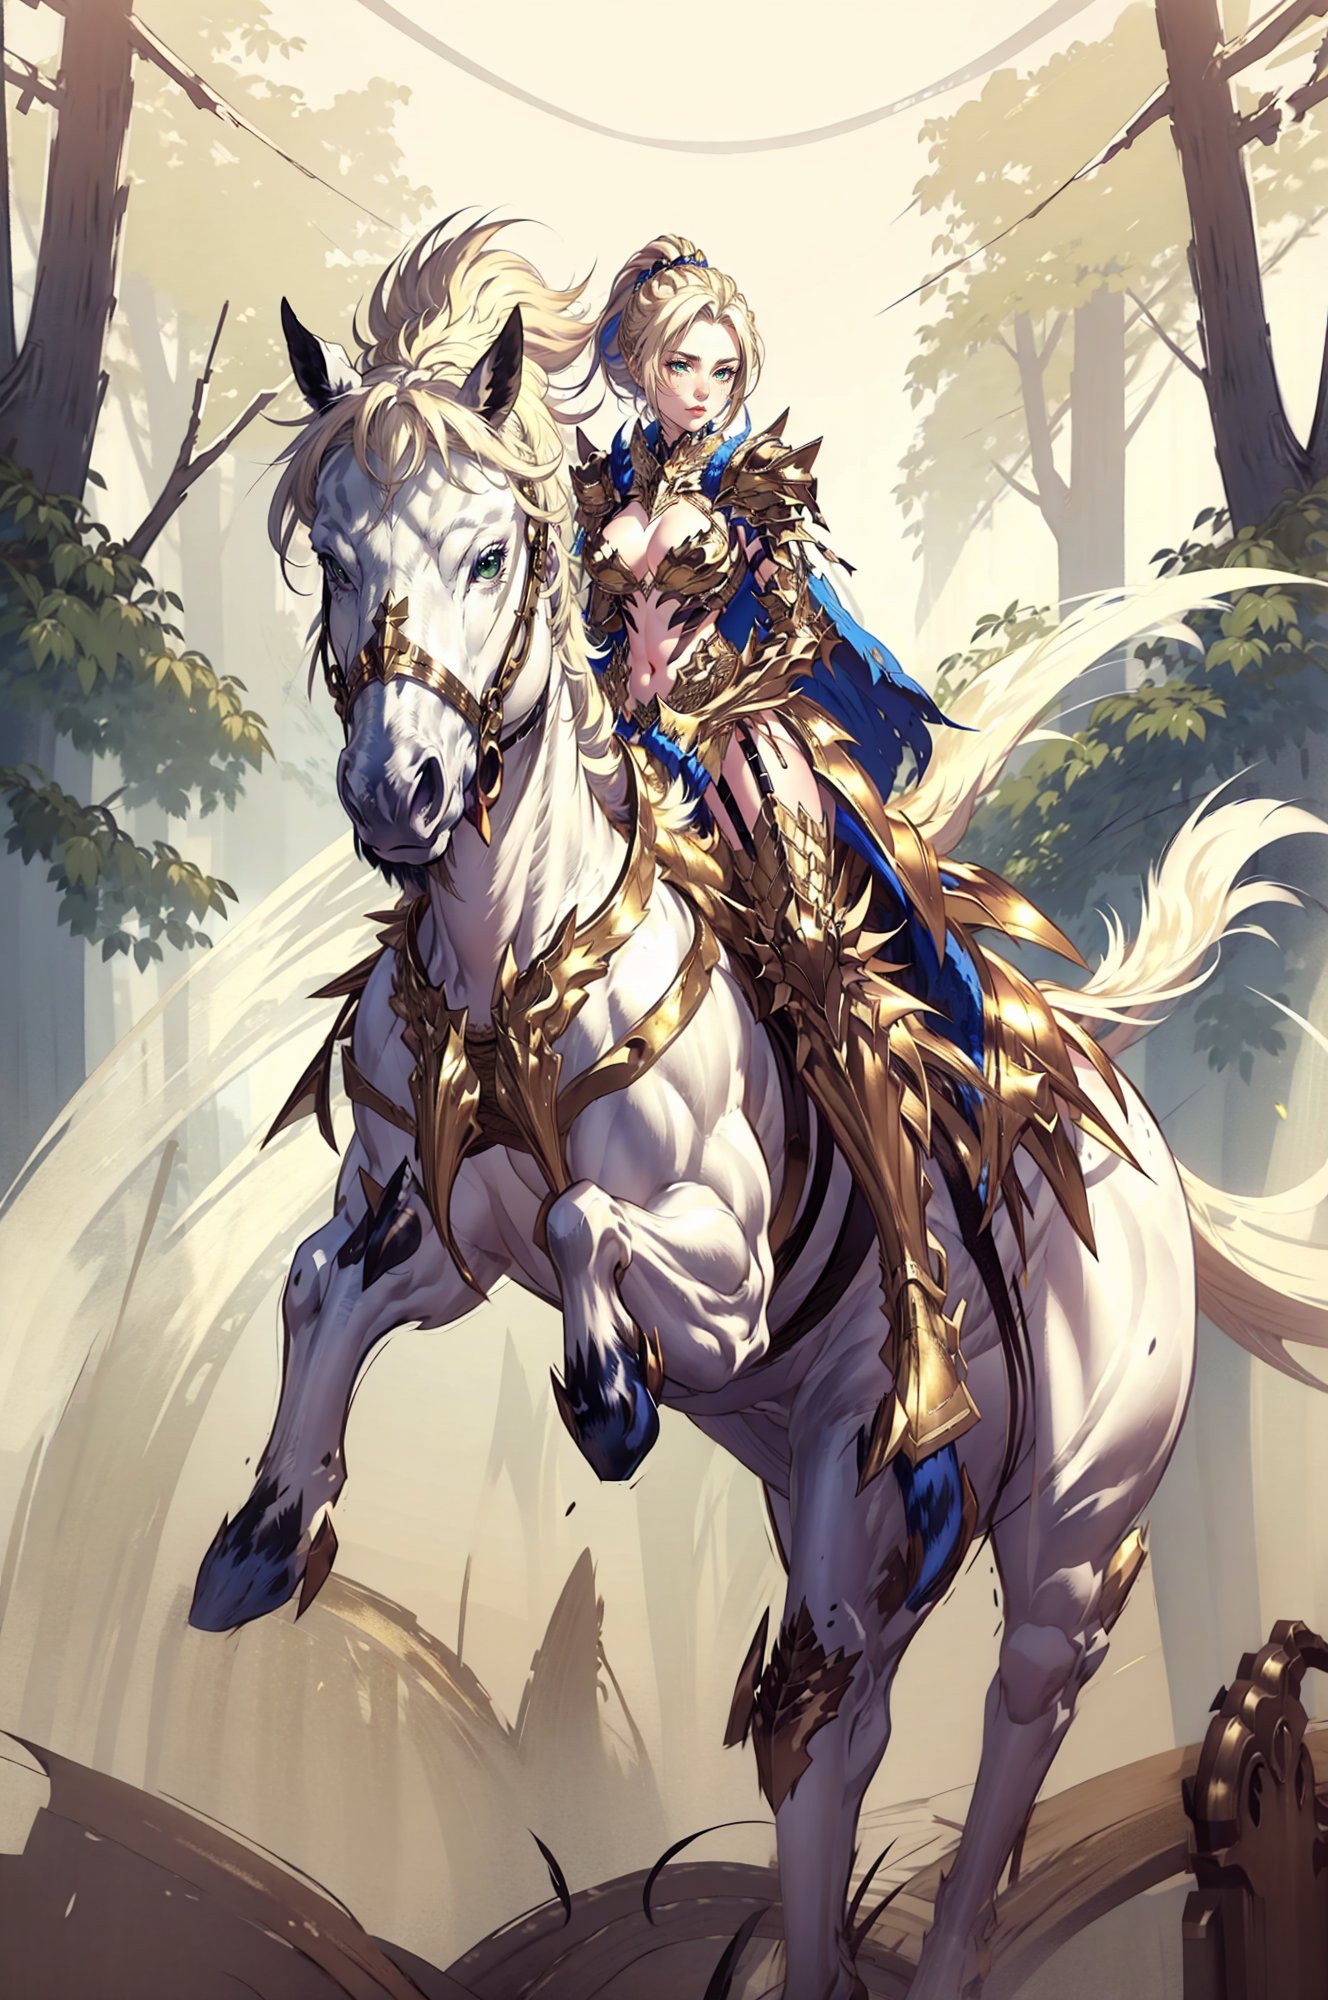 stunning woman wearing LAColdFury, <lora:LAColdFury:0.9>, (blonde hair:1.2), high ponytail, garter strap, blue cape, gold armor, (gold boots), (high heel boots), (wide angle shot, far shot:1), (1 horse), warrior woman riding on a white horse, (horse galloping:1.3), (motion blur),  <lora:riding_a:0.6>, (riding a white warhorse:1.3), posing, BREAK, Background of mystical forest, (white and gold background), (white theme:1.3), BREAK, (masterpiece:1.4), (4k:1.2), (extreme resolution:1.2), (highly intricate:1.2), (studio quality:1.2), (extremely detailed:1.2), (beautiful and aesthetic:1.4)  